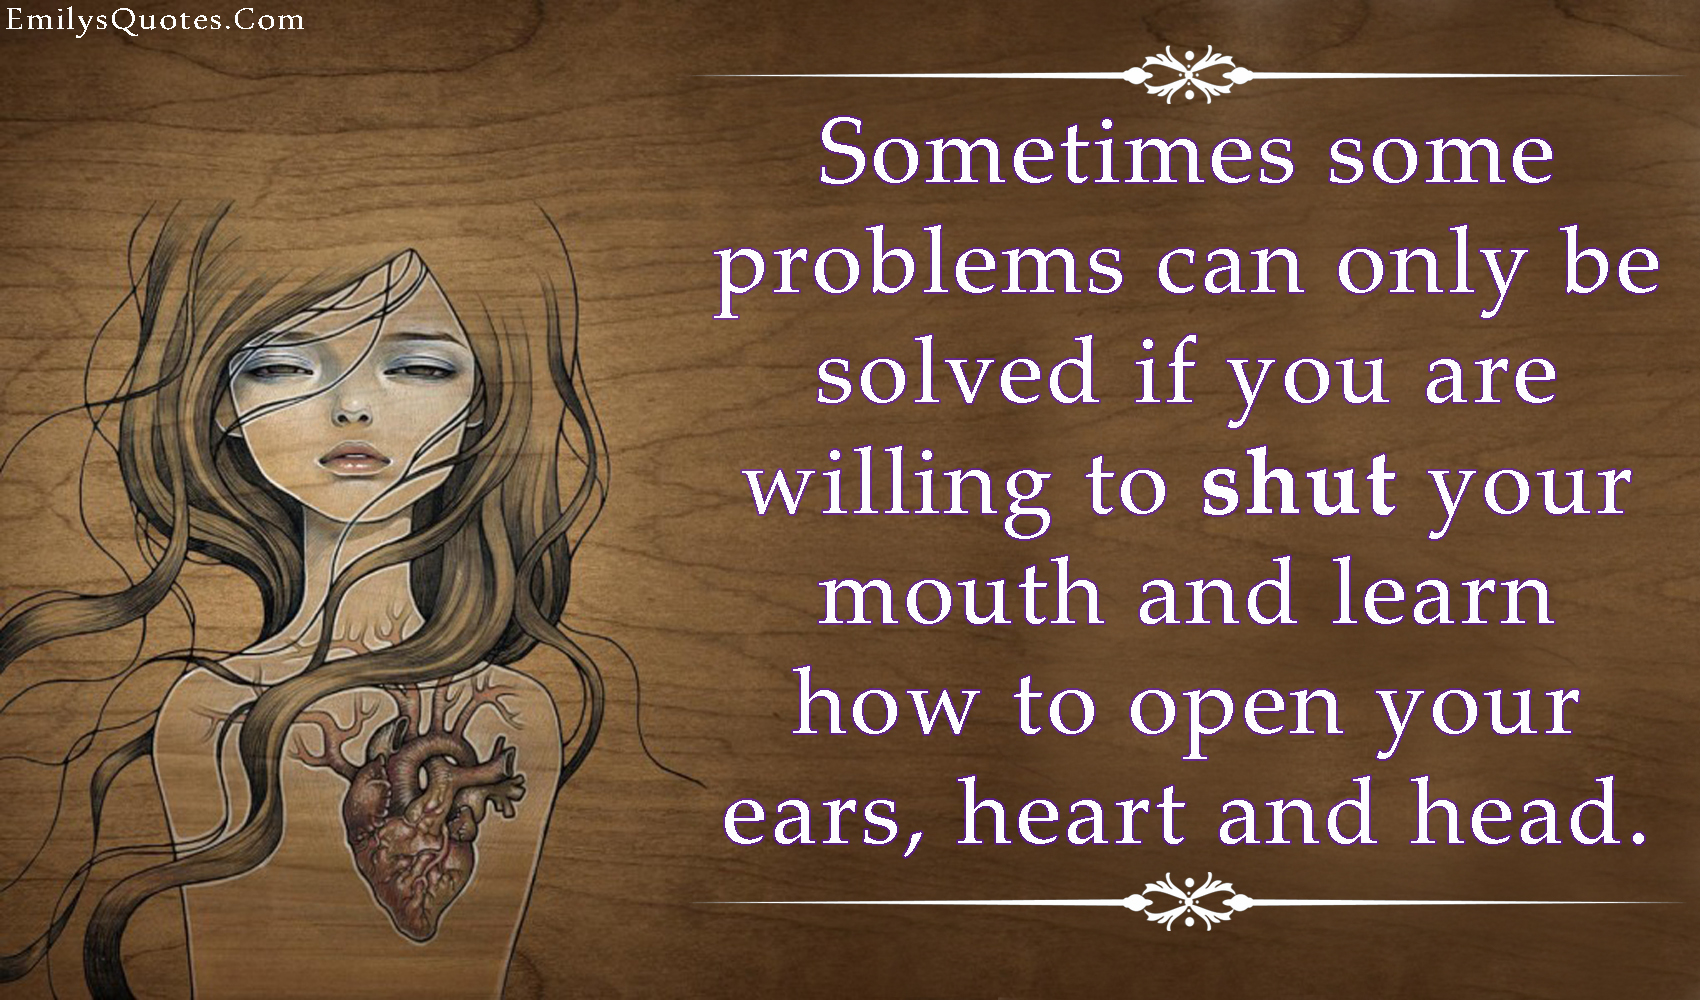 Sometimes some problems can only be solved if you are willing to shut your mouth and learn how to open your ears, heart and head